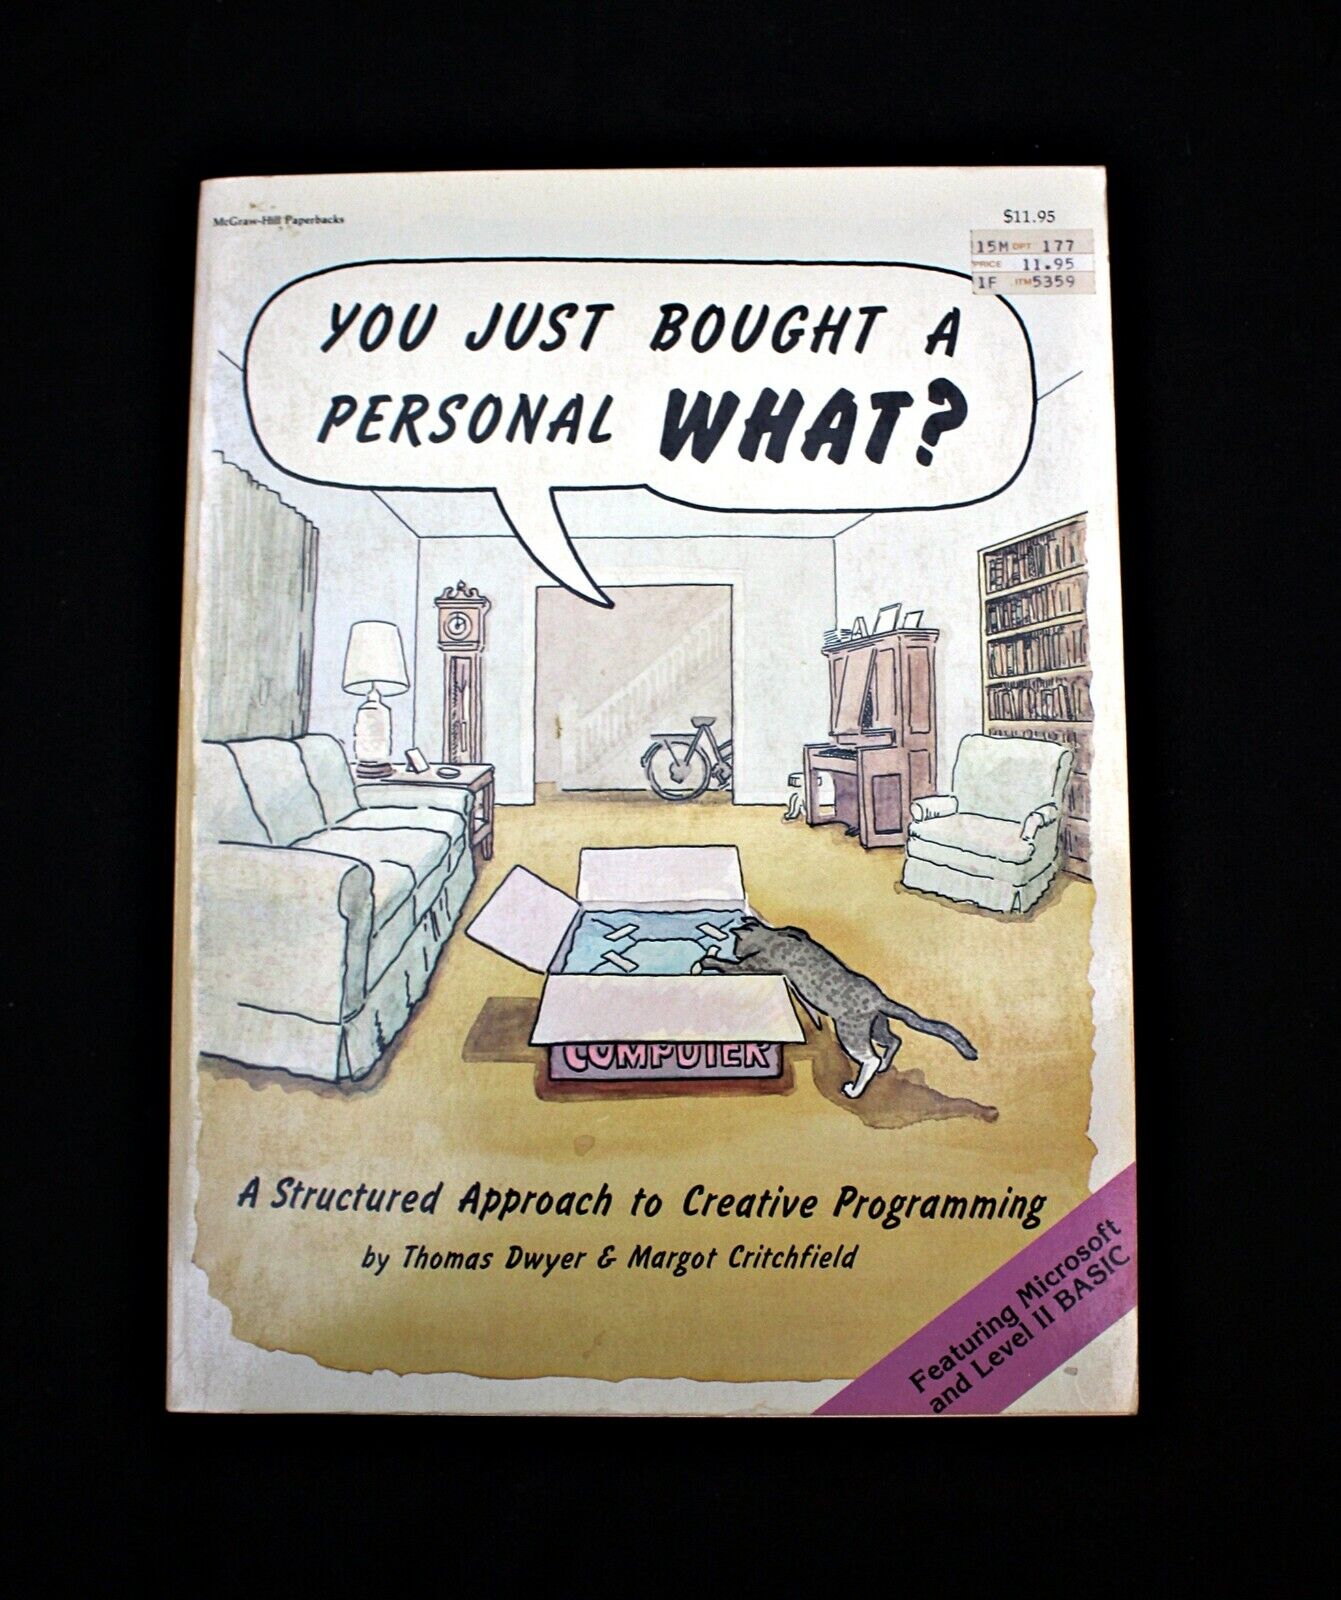 VTG Computer Book YOU JUST BOUGHT A PERSONAL WHAT? Creative Programming Dwyer+